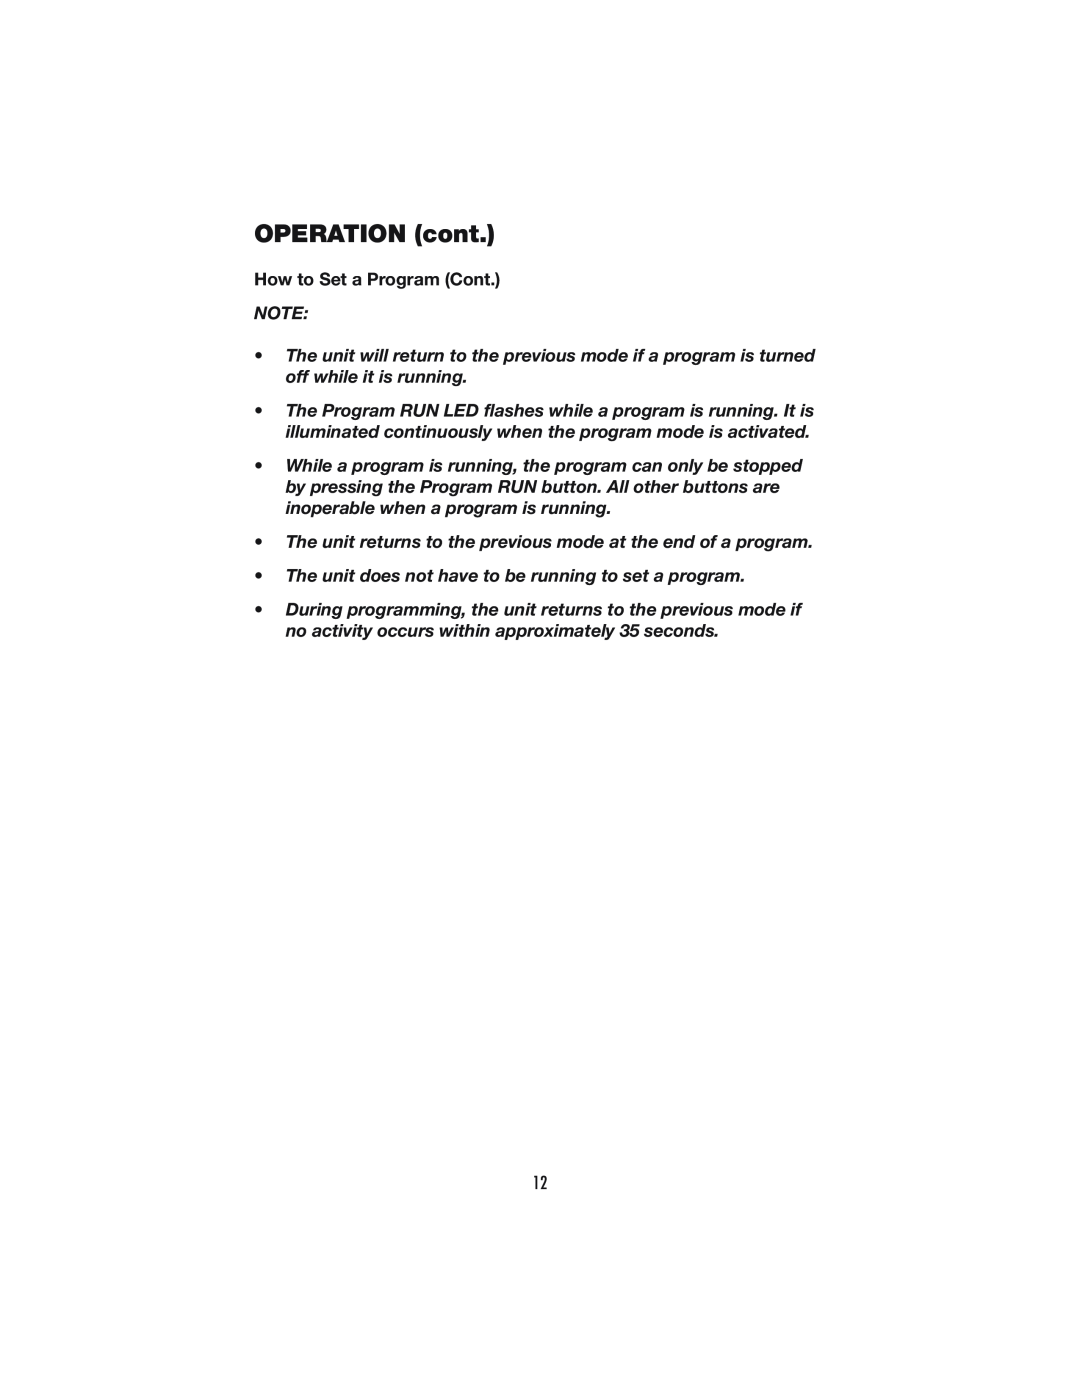 Denso PRO 60 operation manual How to Set a Program Cont, OPERATION cont 